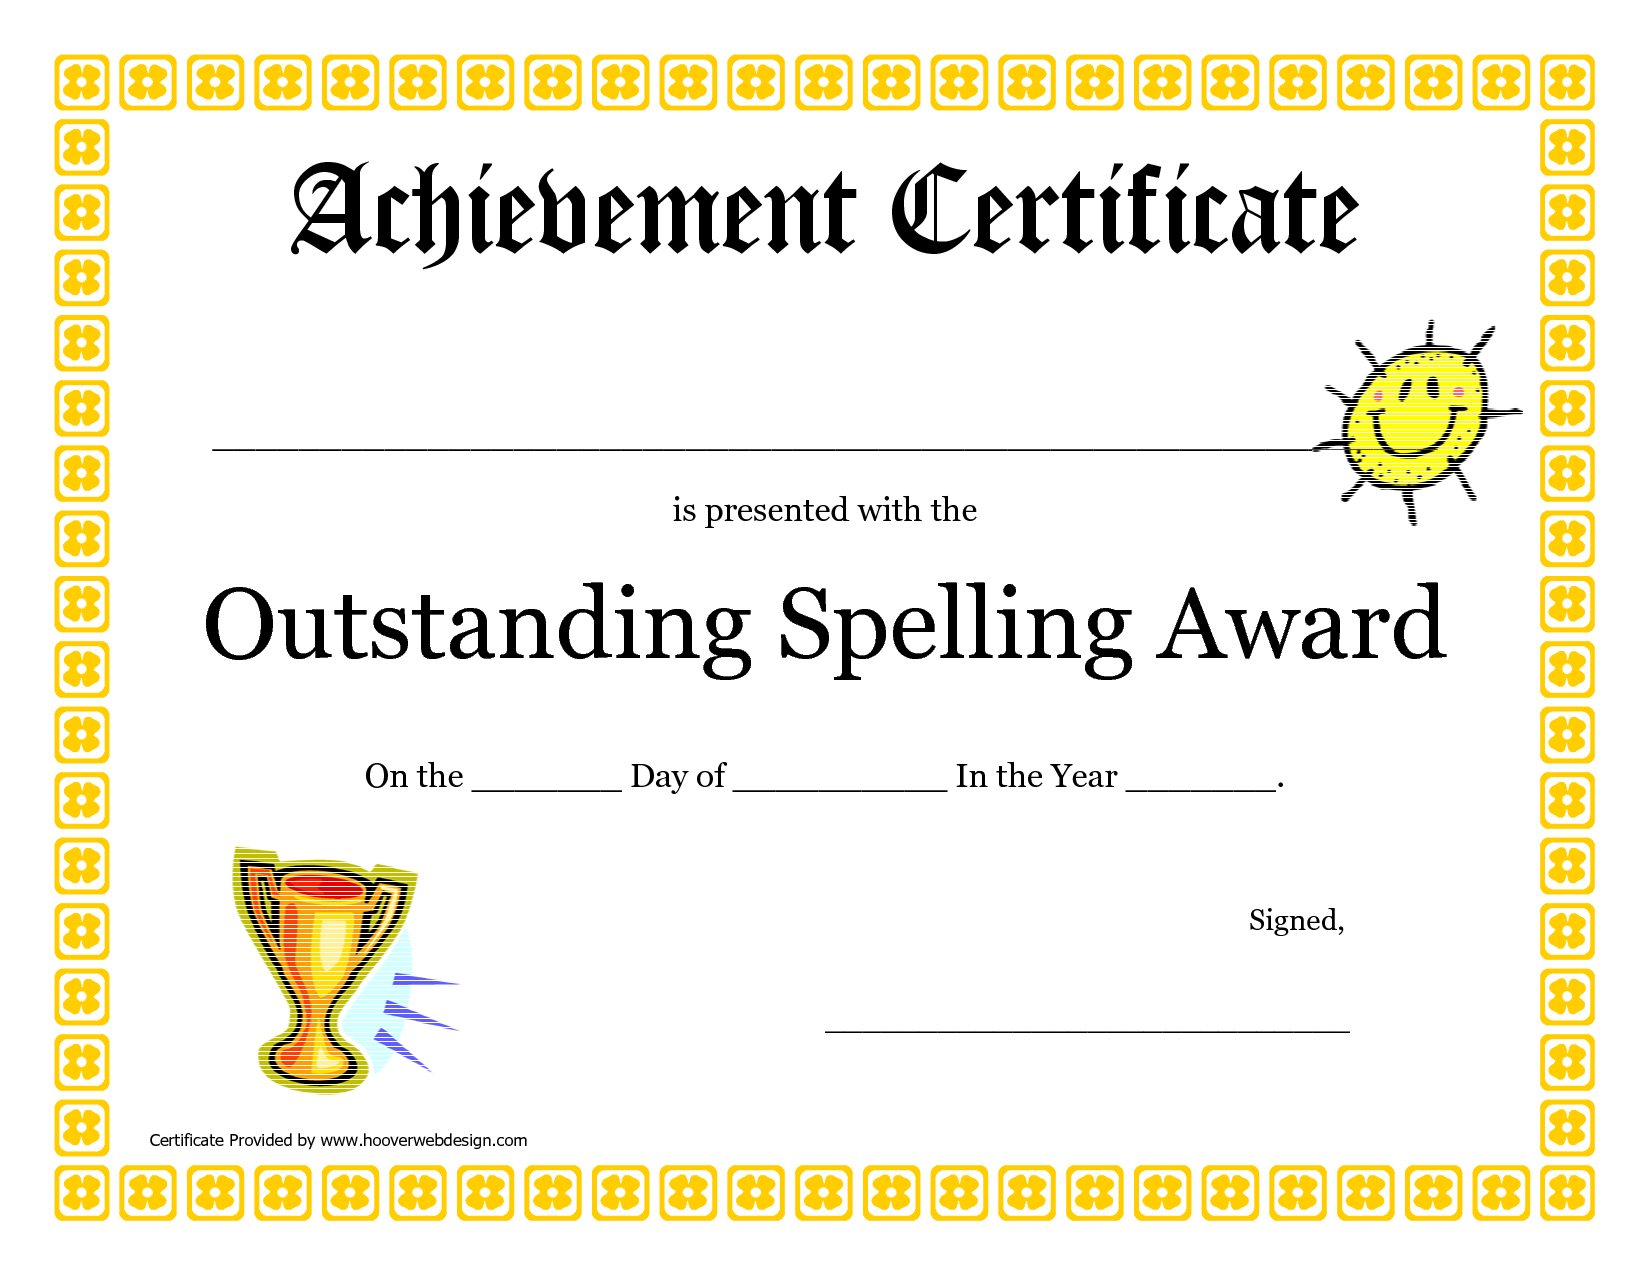 Outstanding Spelling Award Printable Certificate Pdf Picture Within Student Of The Year Award Certificate Templates